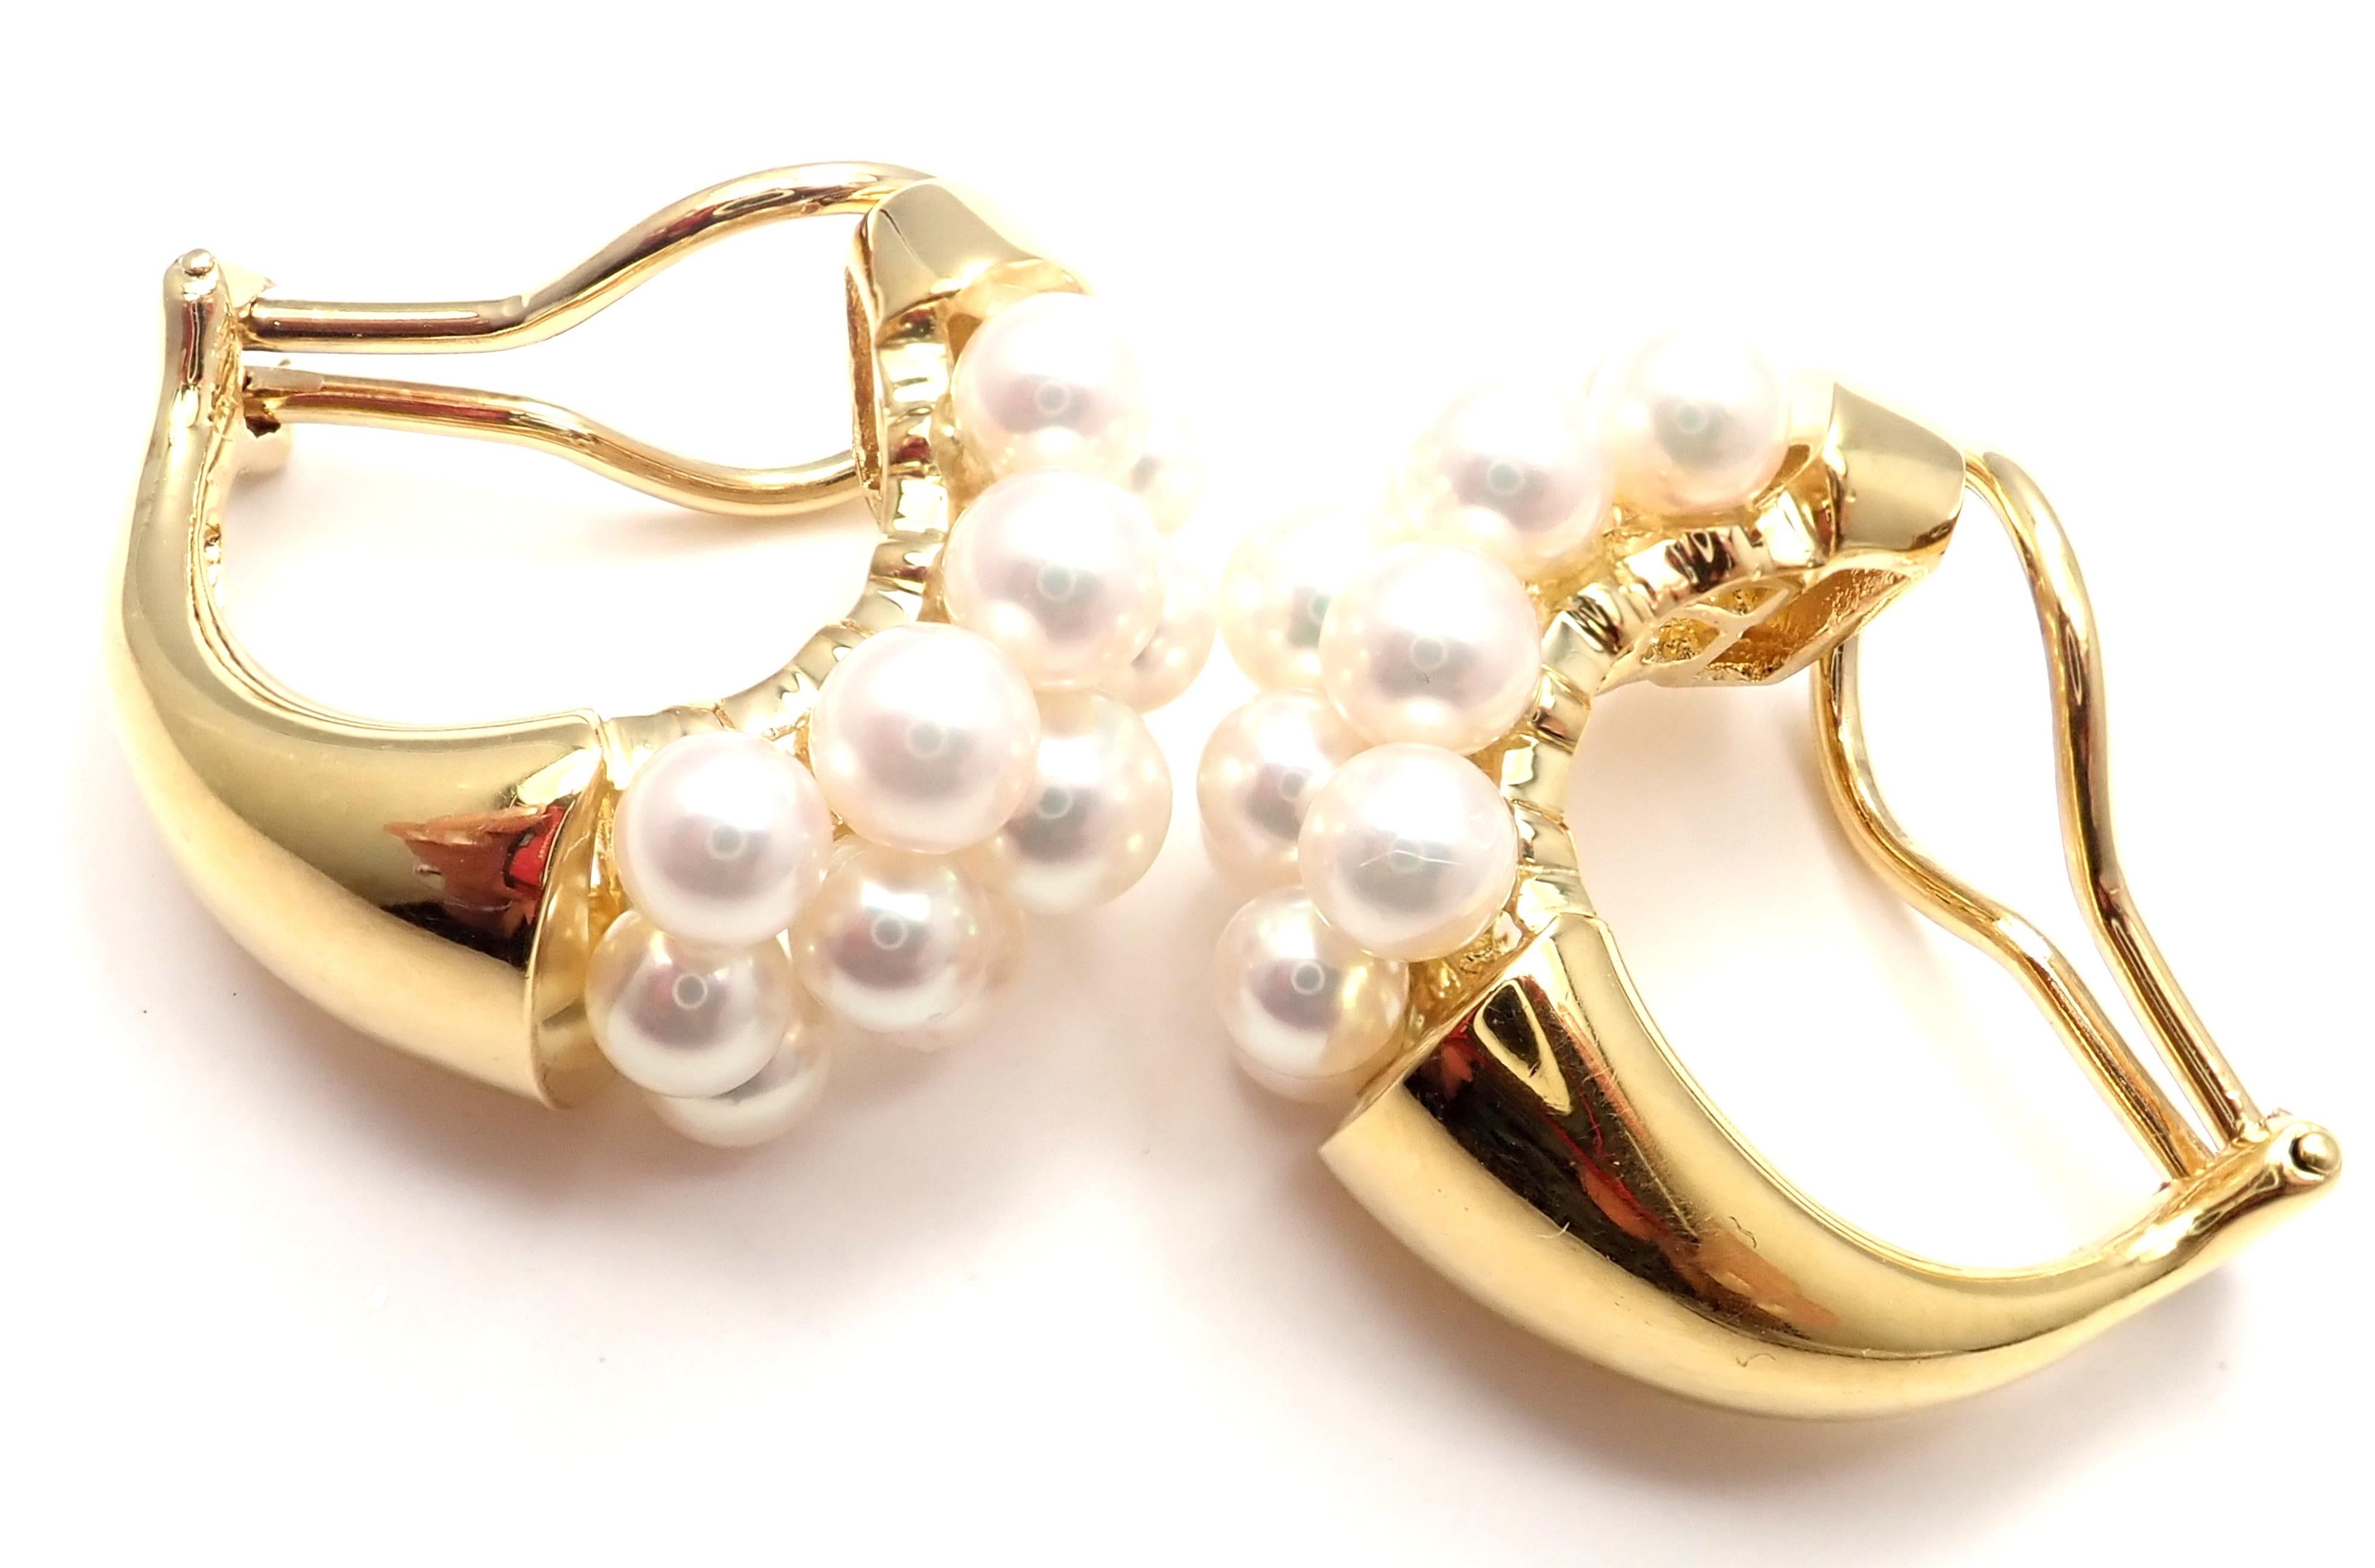 18k Yellow Gold Pearl Hoop Earrings by Mikimoto. 
With 26x 5mm White Pearls
Details: 
Measurements: 25mm x 14mm
Weight: 19.5 grams
Stamped Hallmarks: M (in seashell logo for Mikimoto) 750
*Free Shipping within the United States*
Your Price: